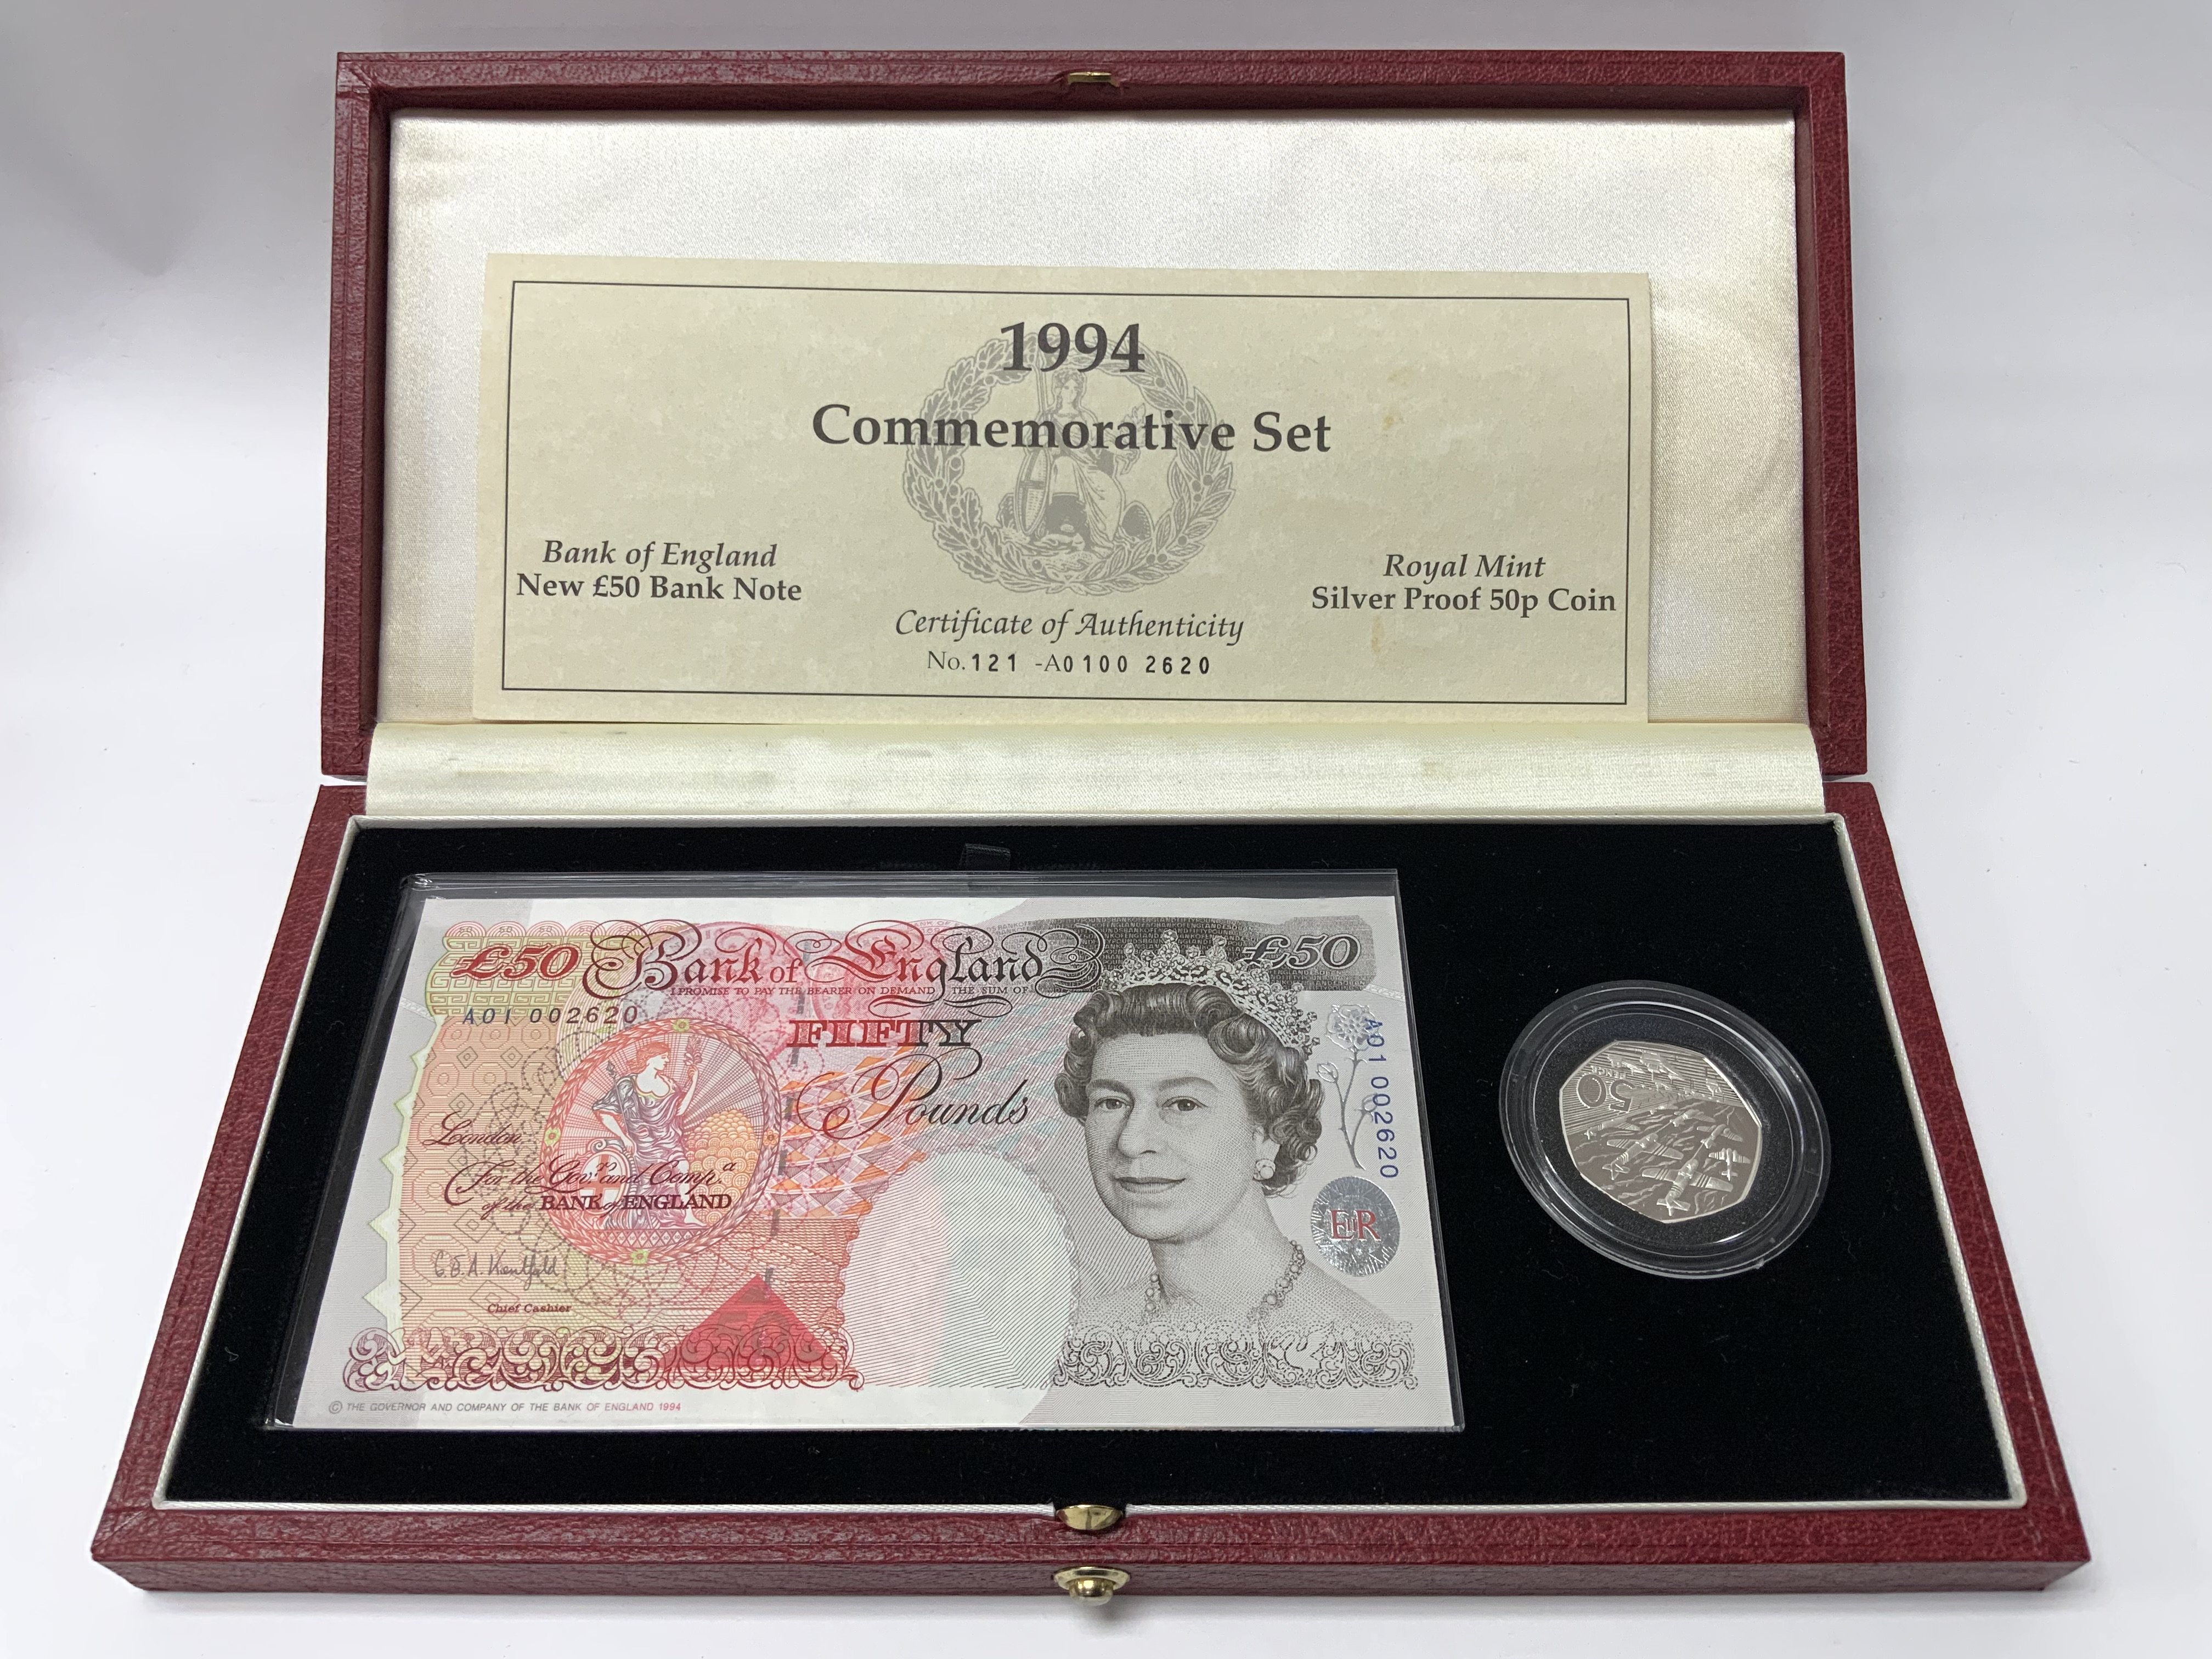 Royal Mint issue 1994 cased commemorative Bank of